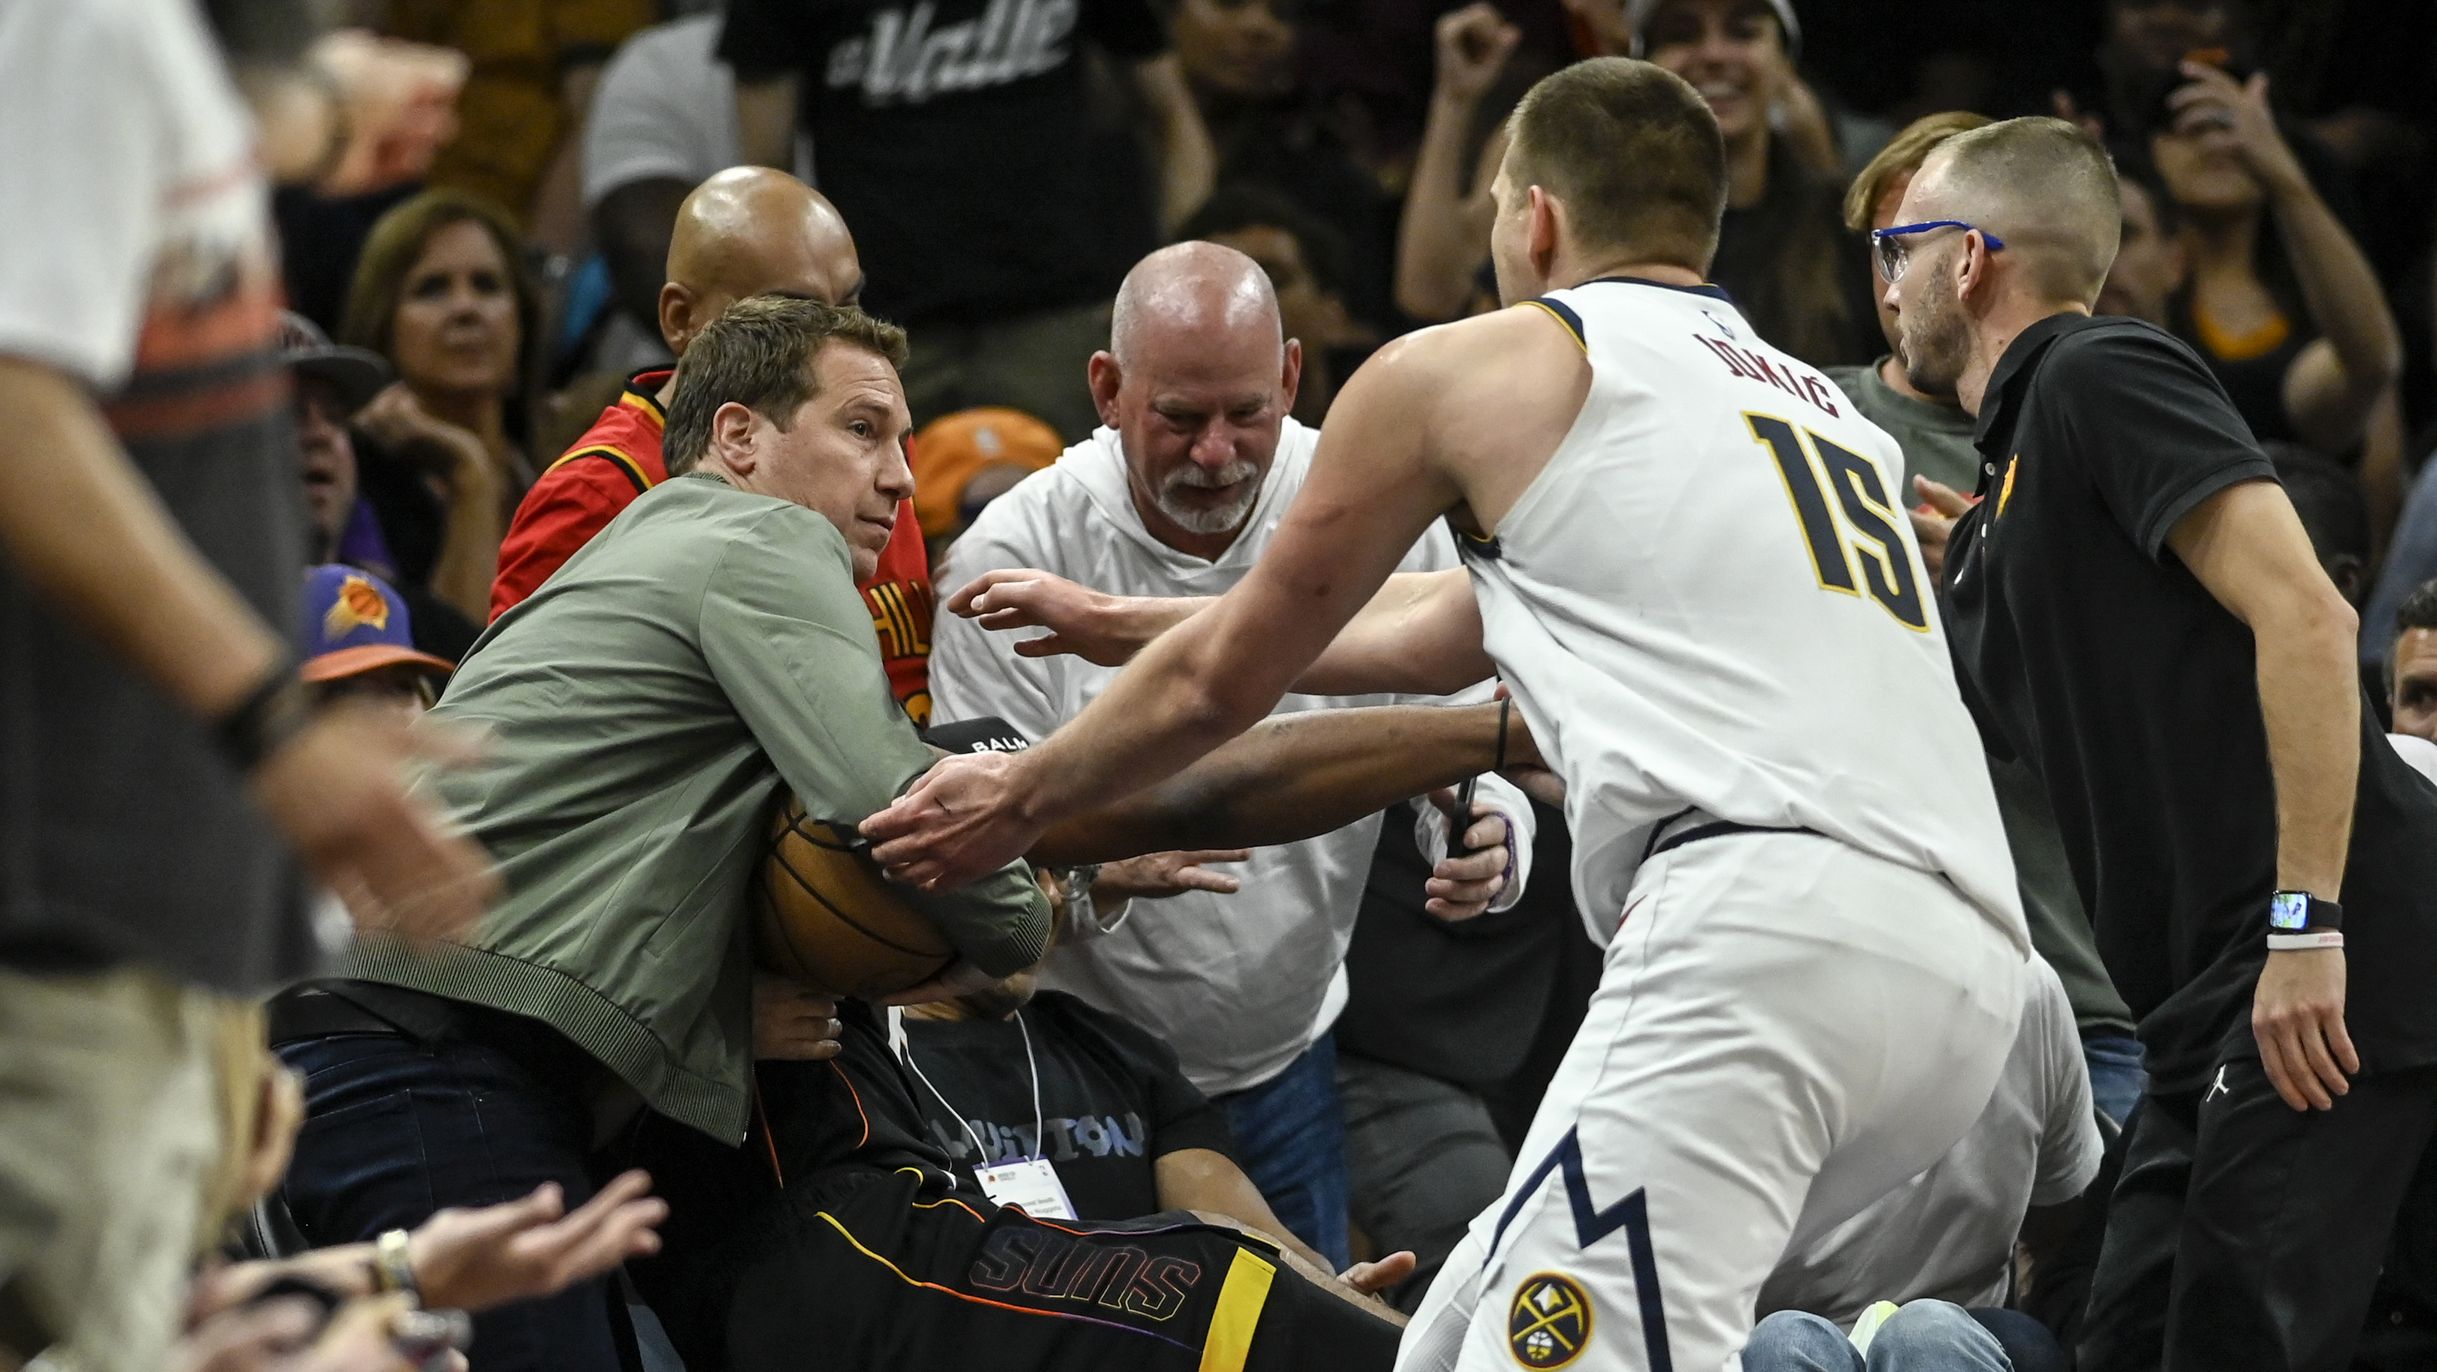 PHOENIX, AZ - MAY 7: Nikola Jokic (15) of the Denver Nuggets rushes to retrieve the game ball as Phoenix Suns owner Mat Ishbia inserts himself into the action by clutching the ball as he helps Josh Okogie (2) to his feet after Okogie flew into the stands during the second quarter at Footprint Center in Phoenix on Sunday, May 7, 2023. (Photo by AAron Ontiveroz/The Denver Post)